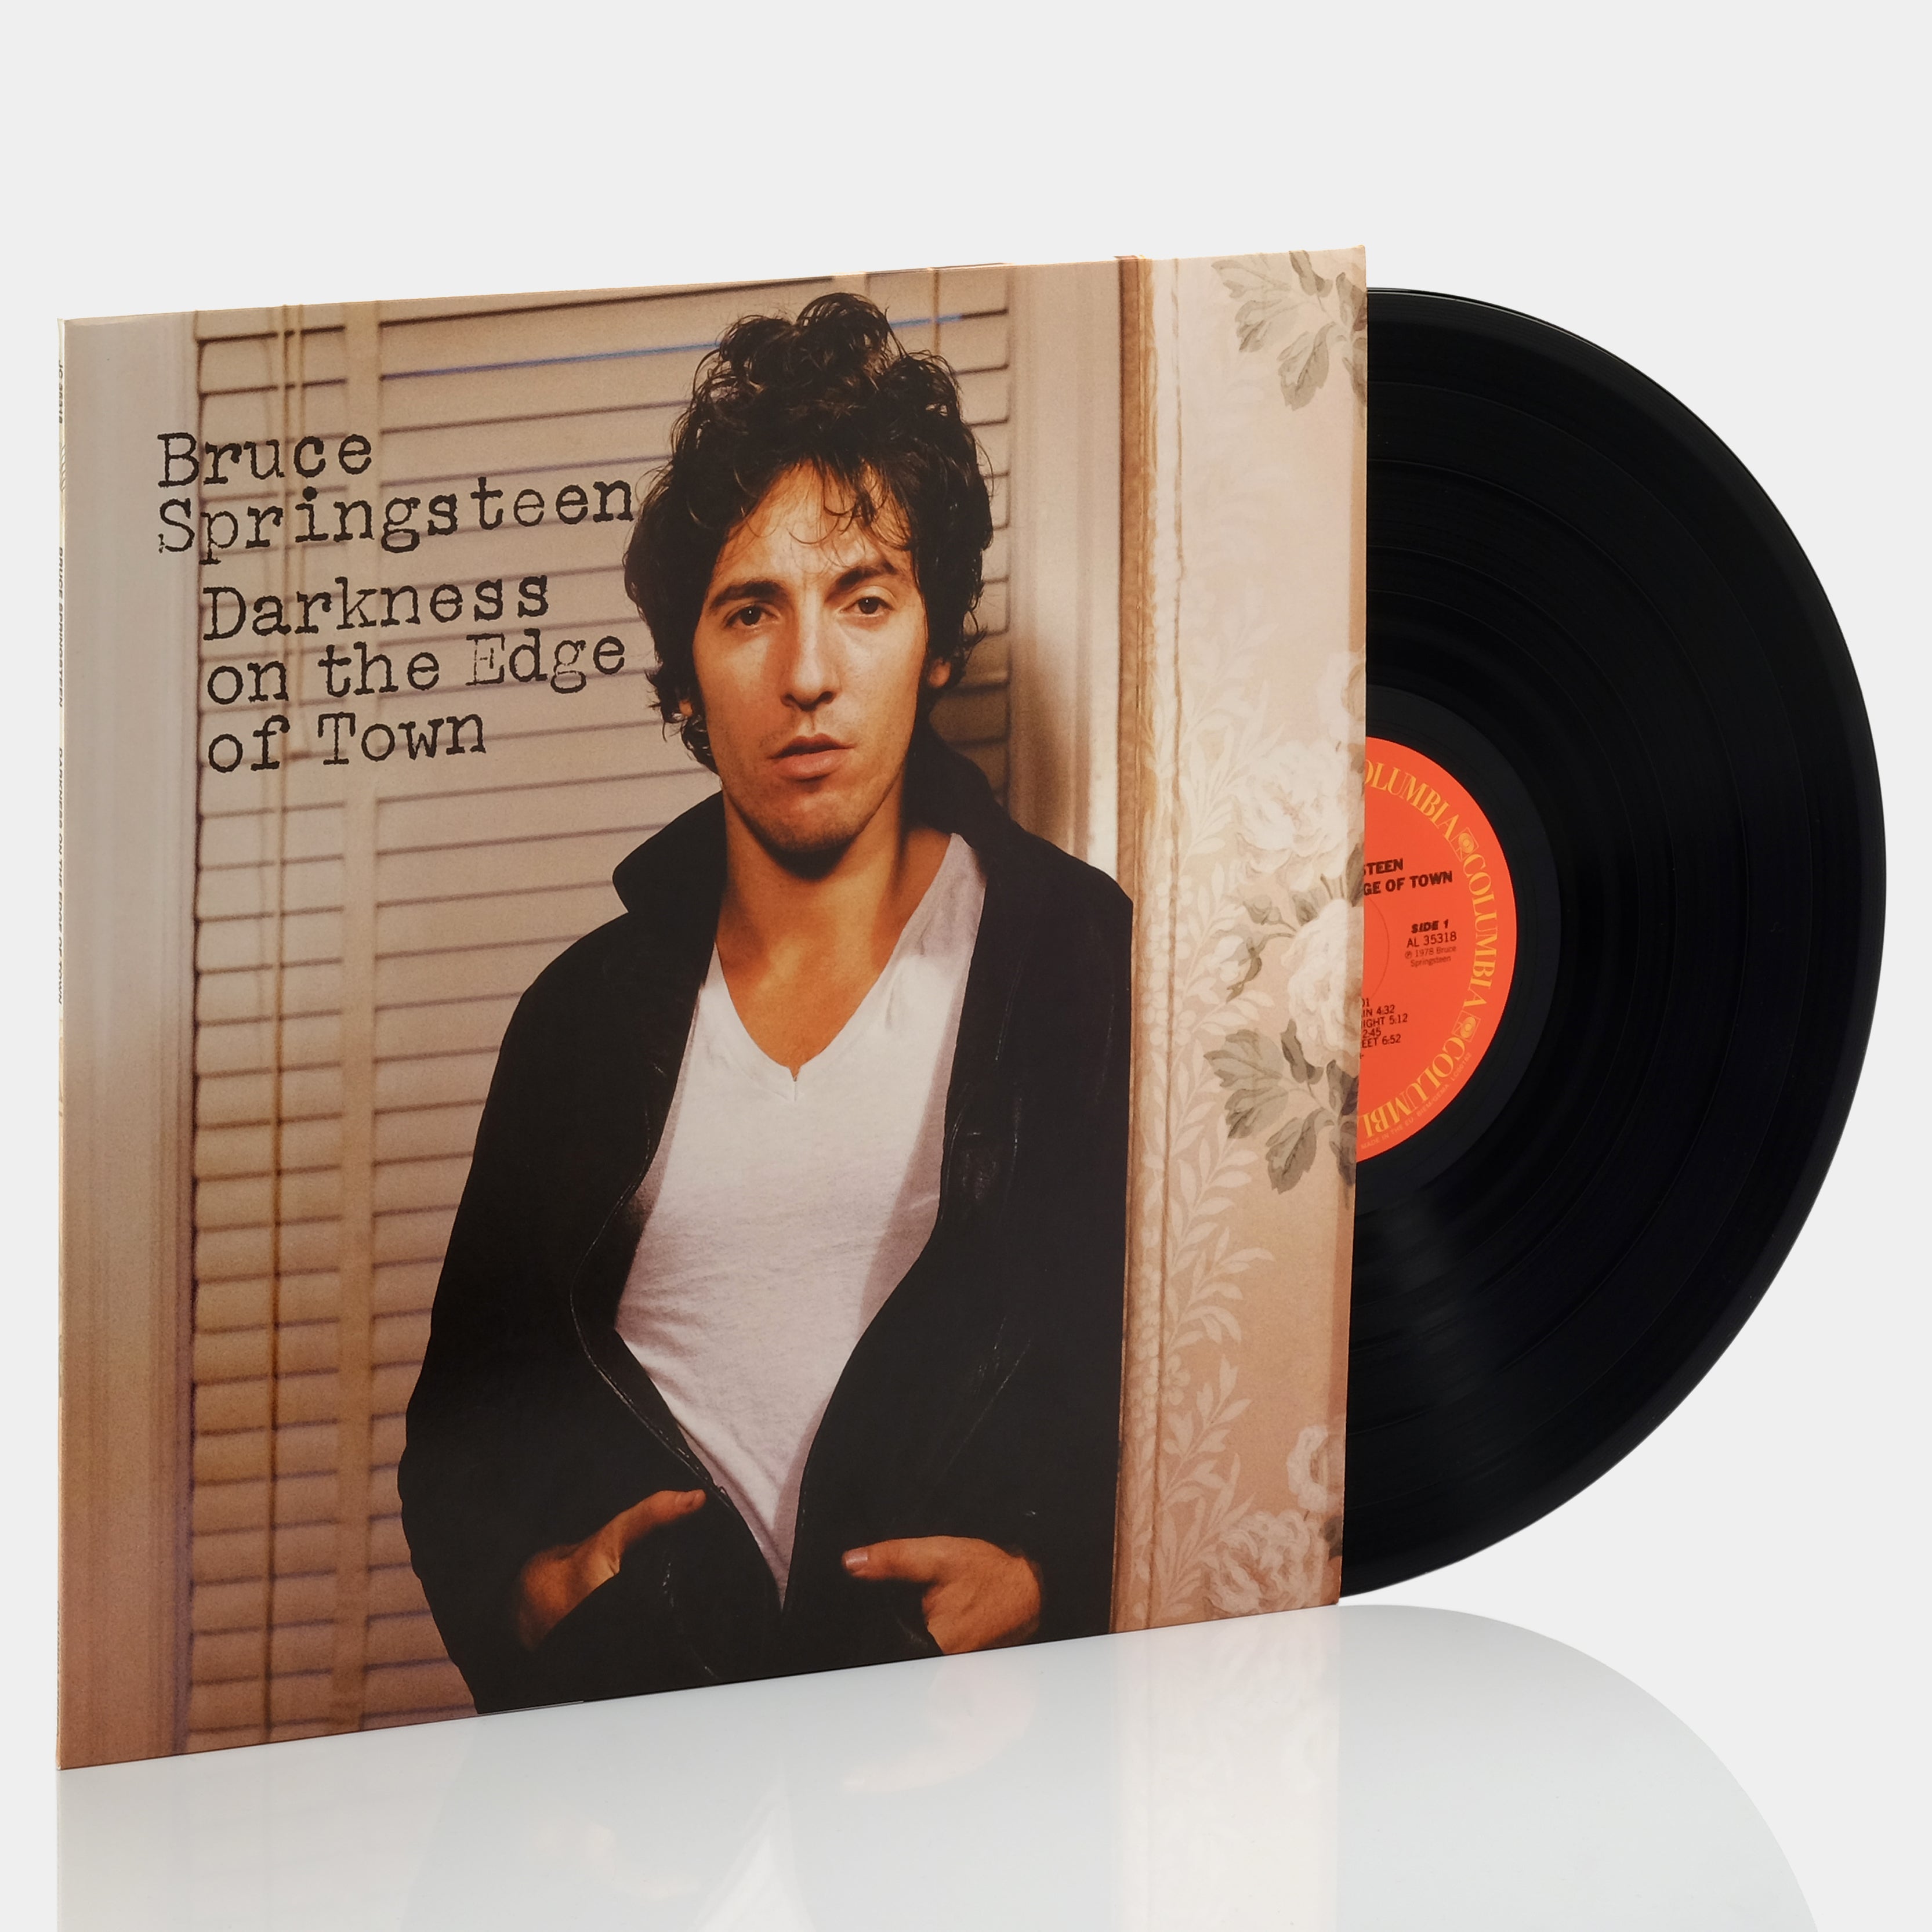 Bruce Springsteen - Darkness on the Edge of Town LP Vinyl Record